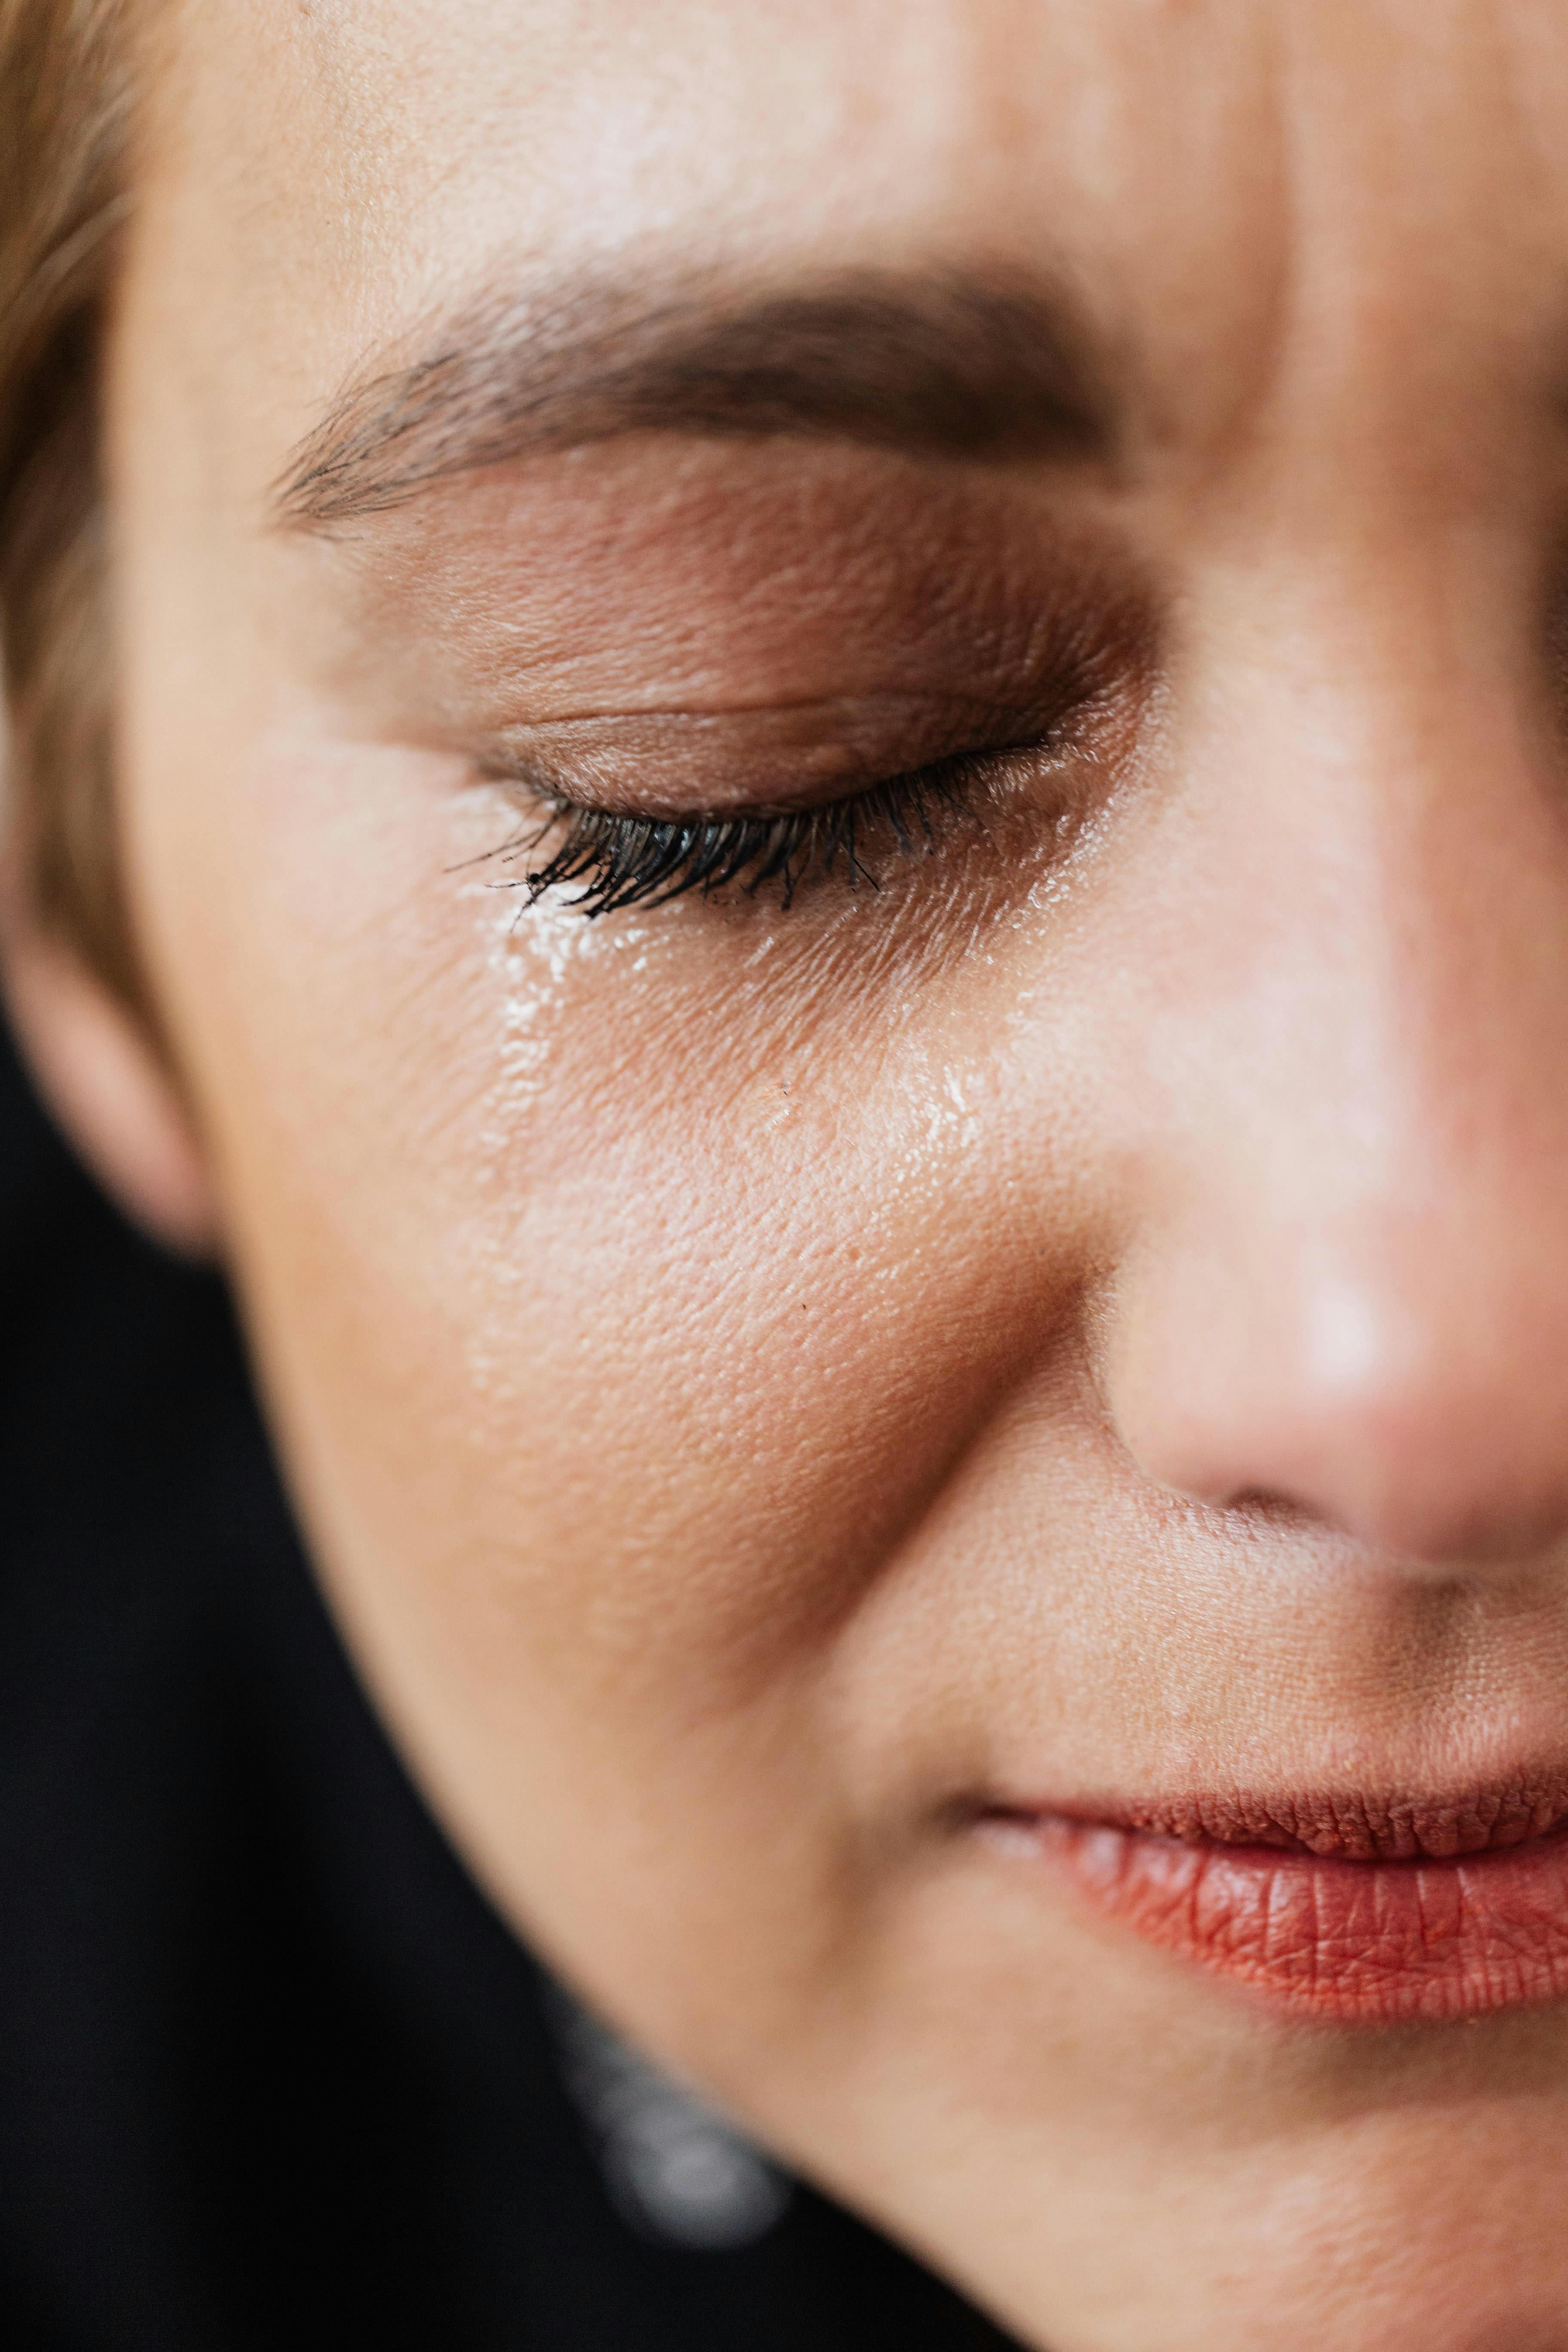 A woman crying with her eyes closed | Source: Pexels